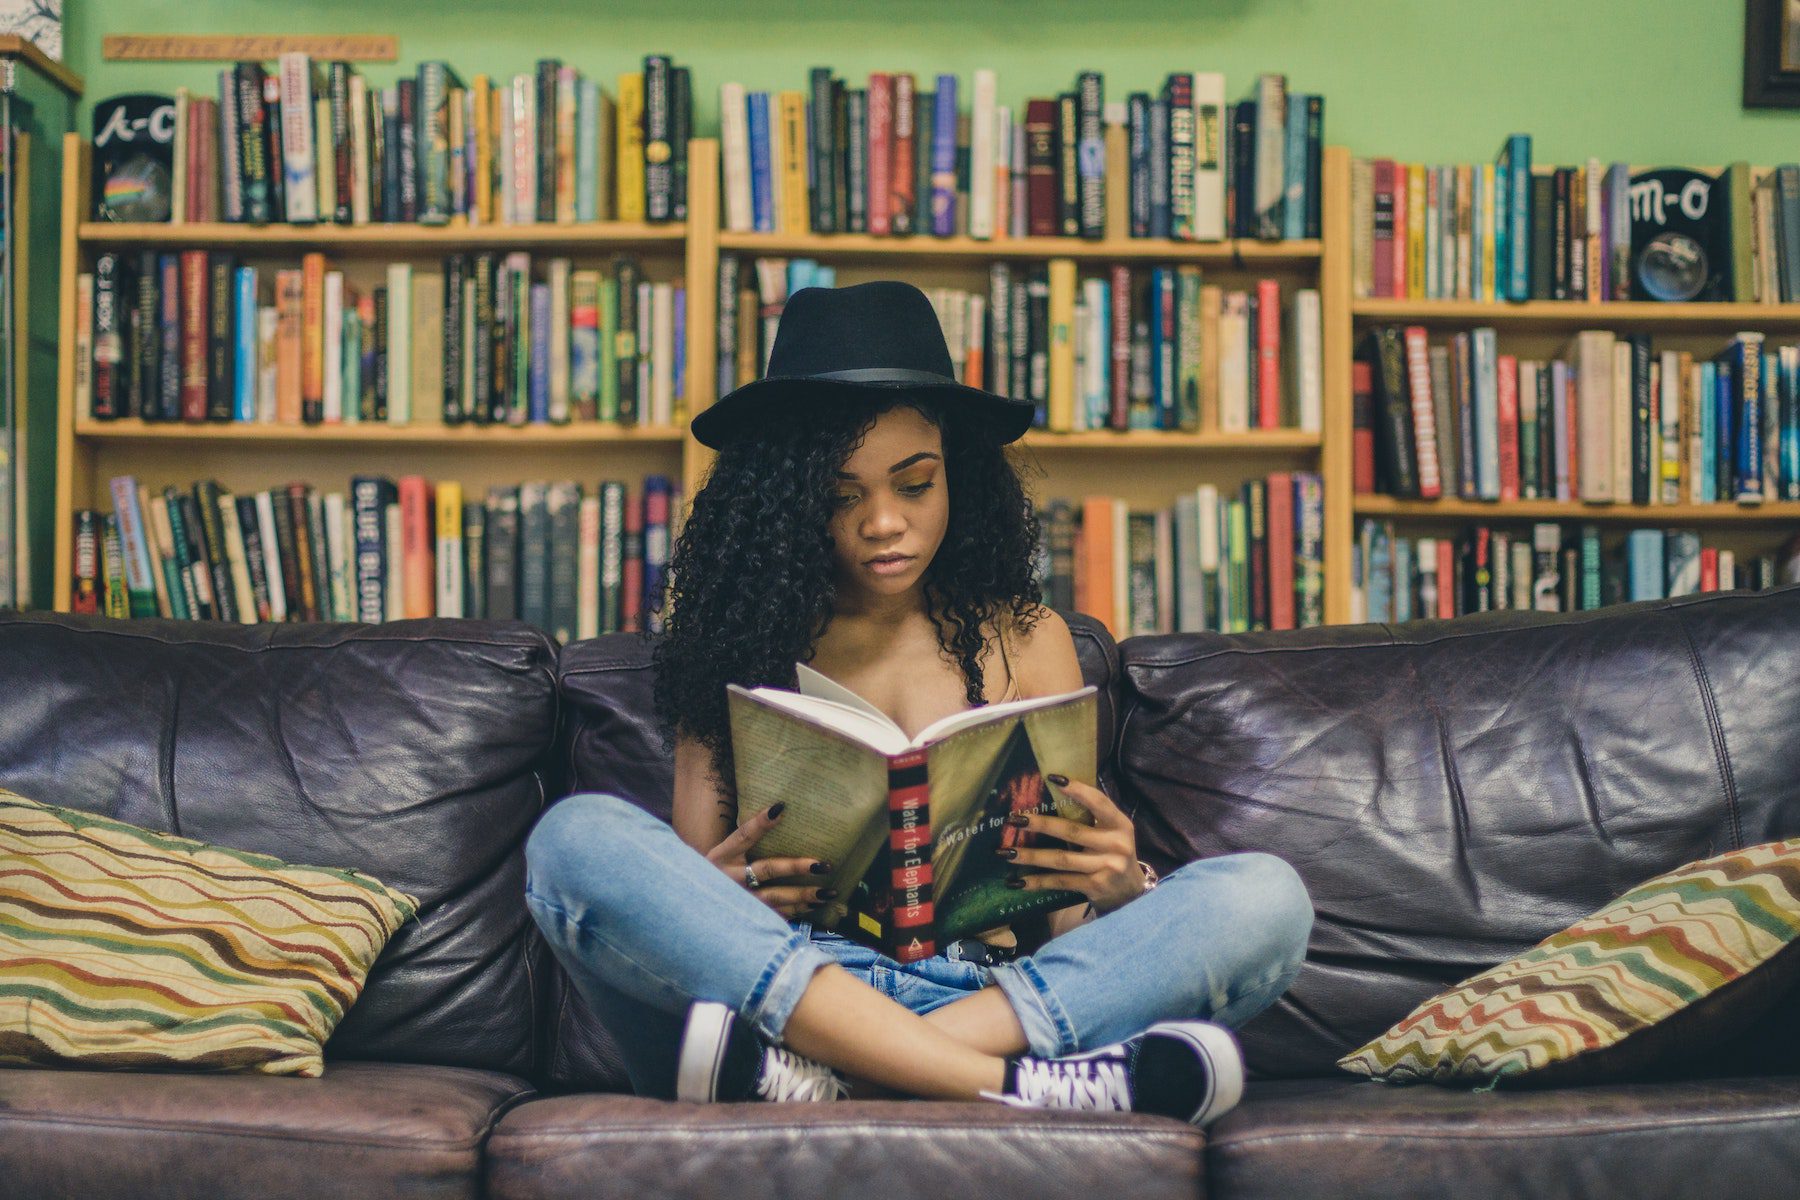 A girl wearing a black fedora and blue jeans reading a book on a dark leather couch with a small library of books behind her